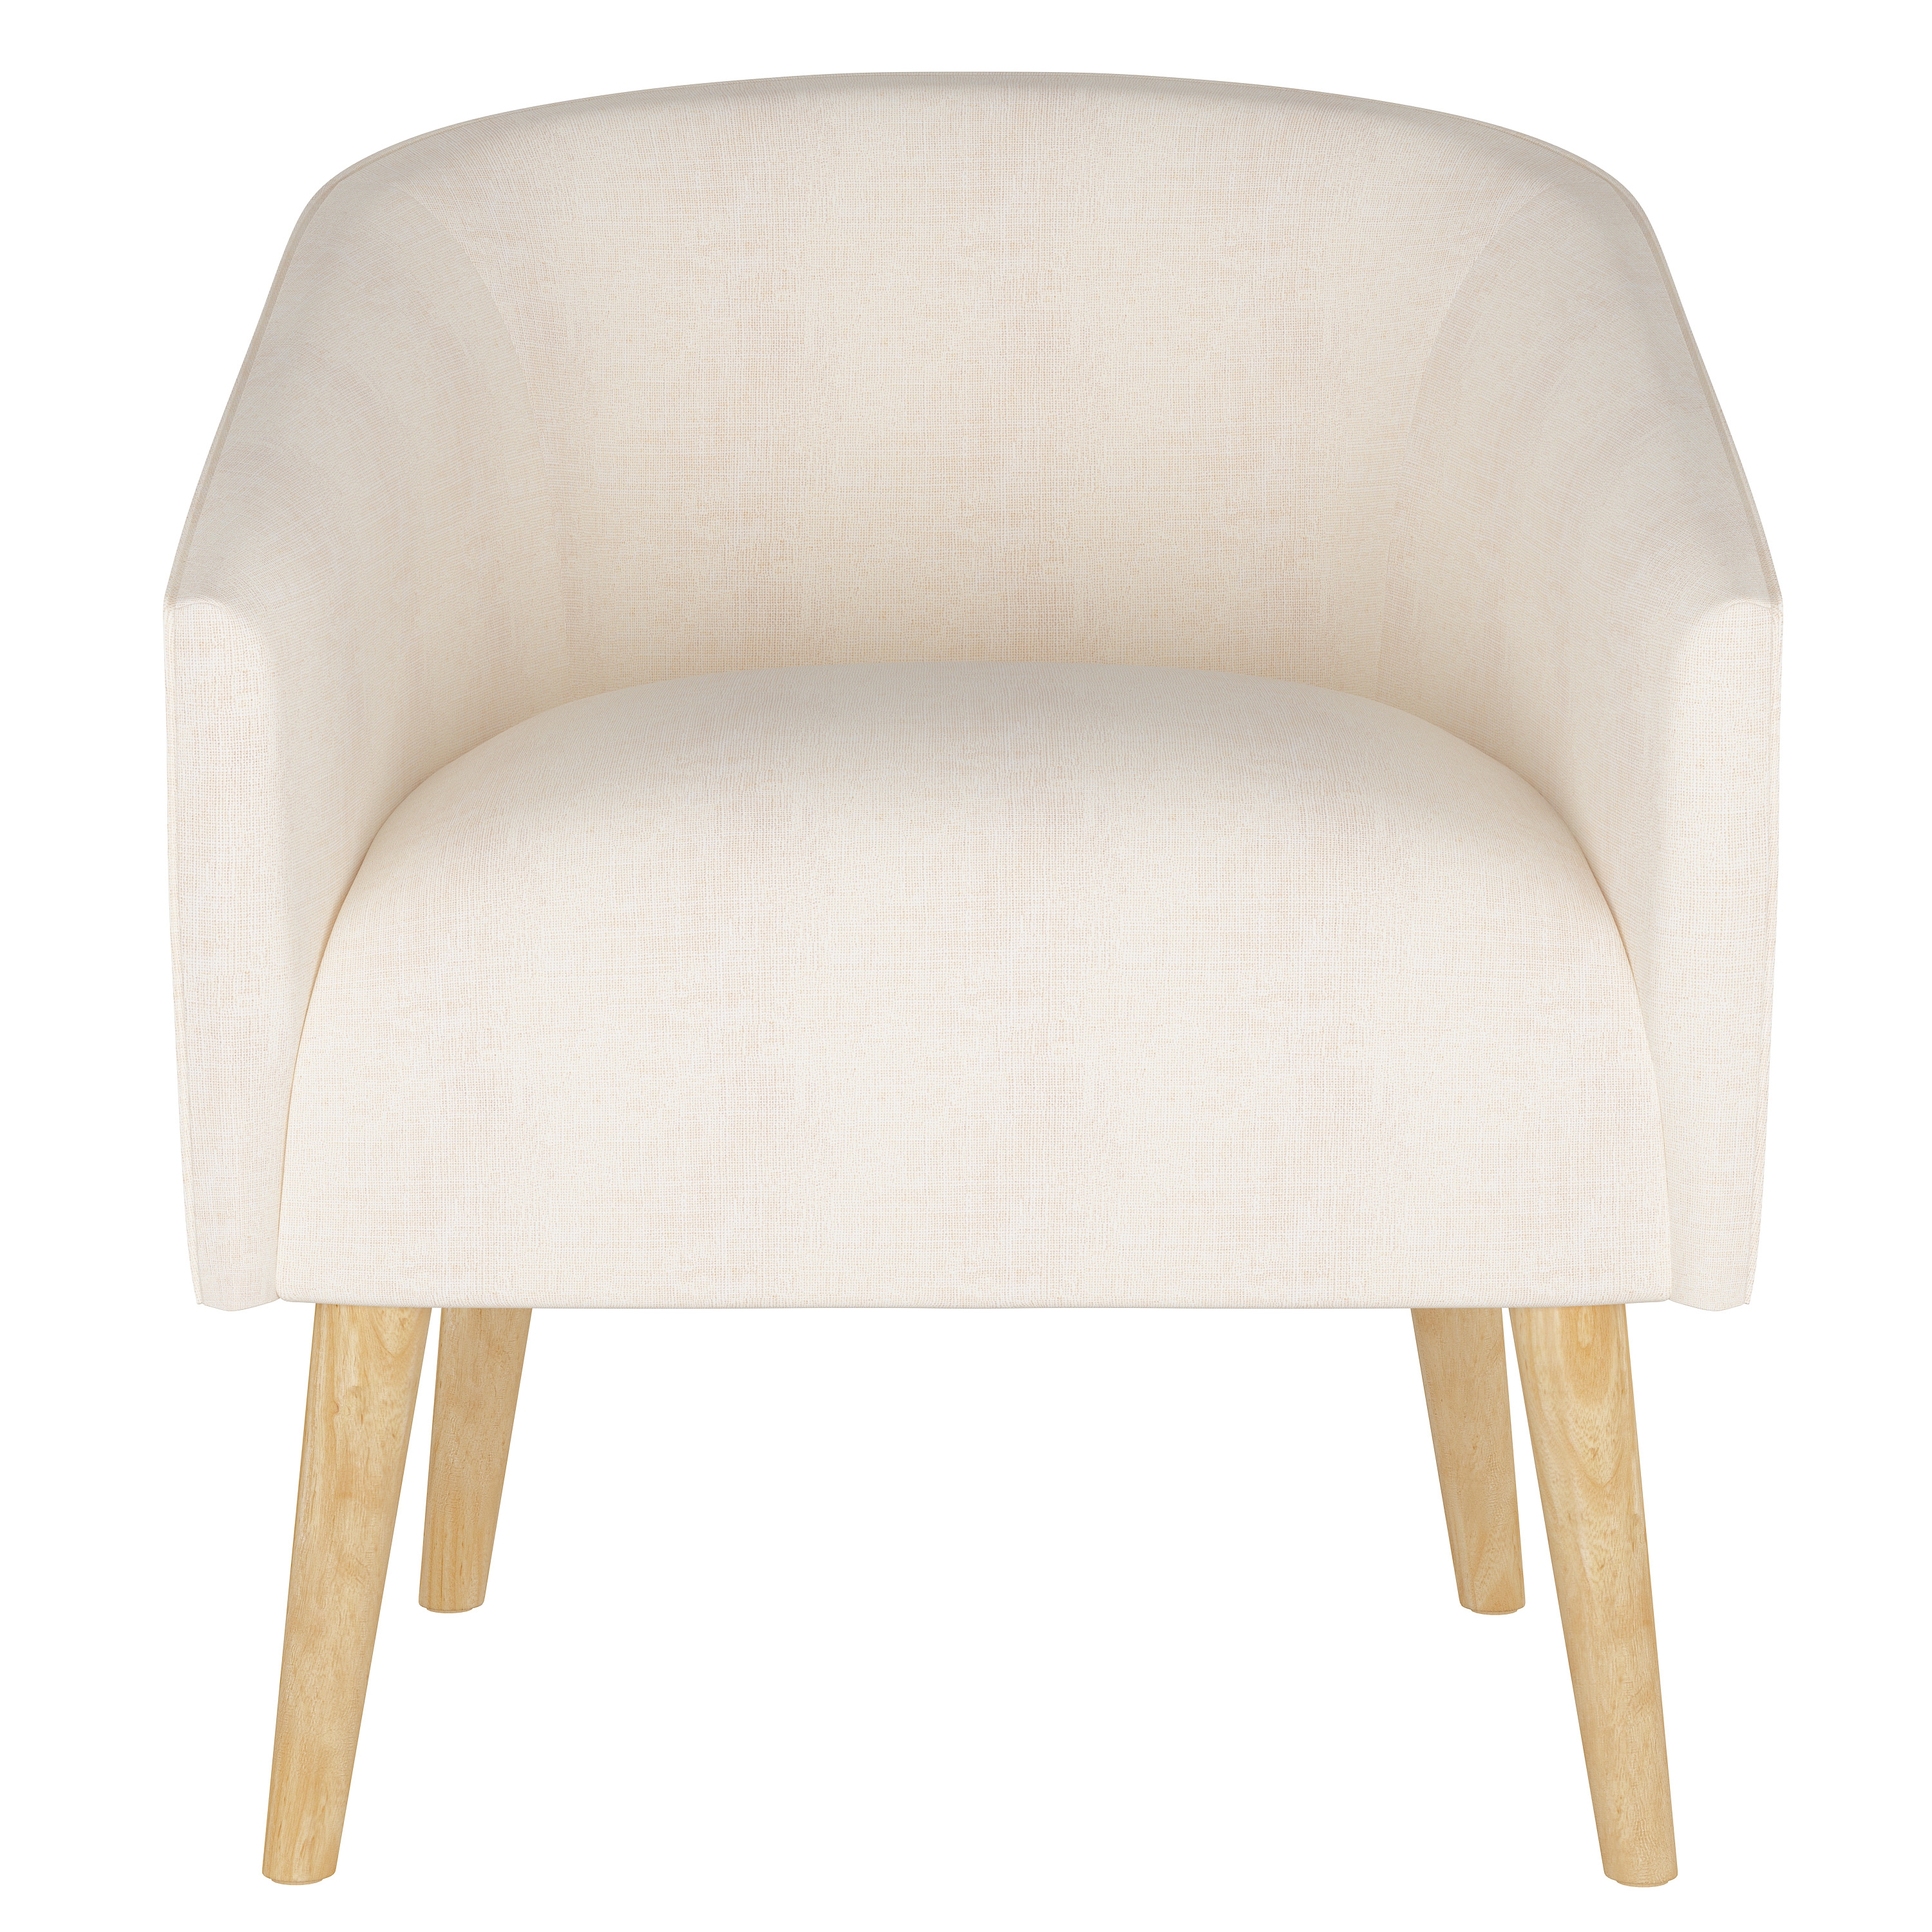 Dexter Chair, White - Image 1